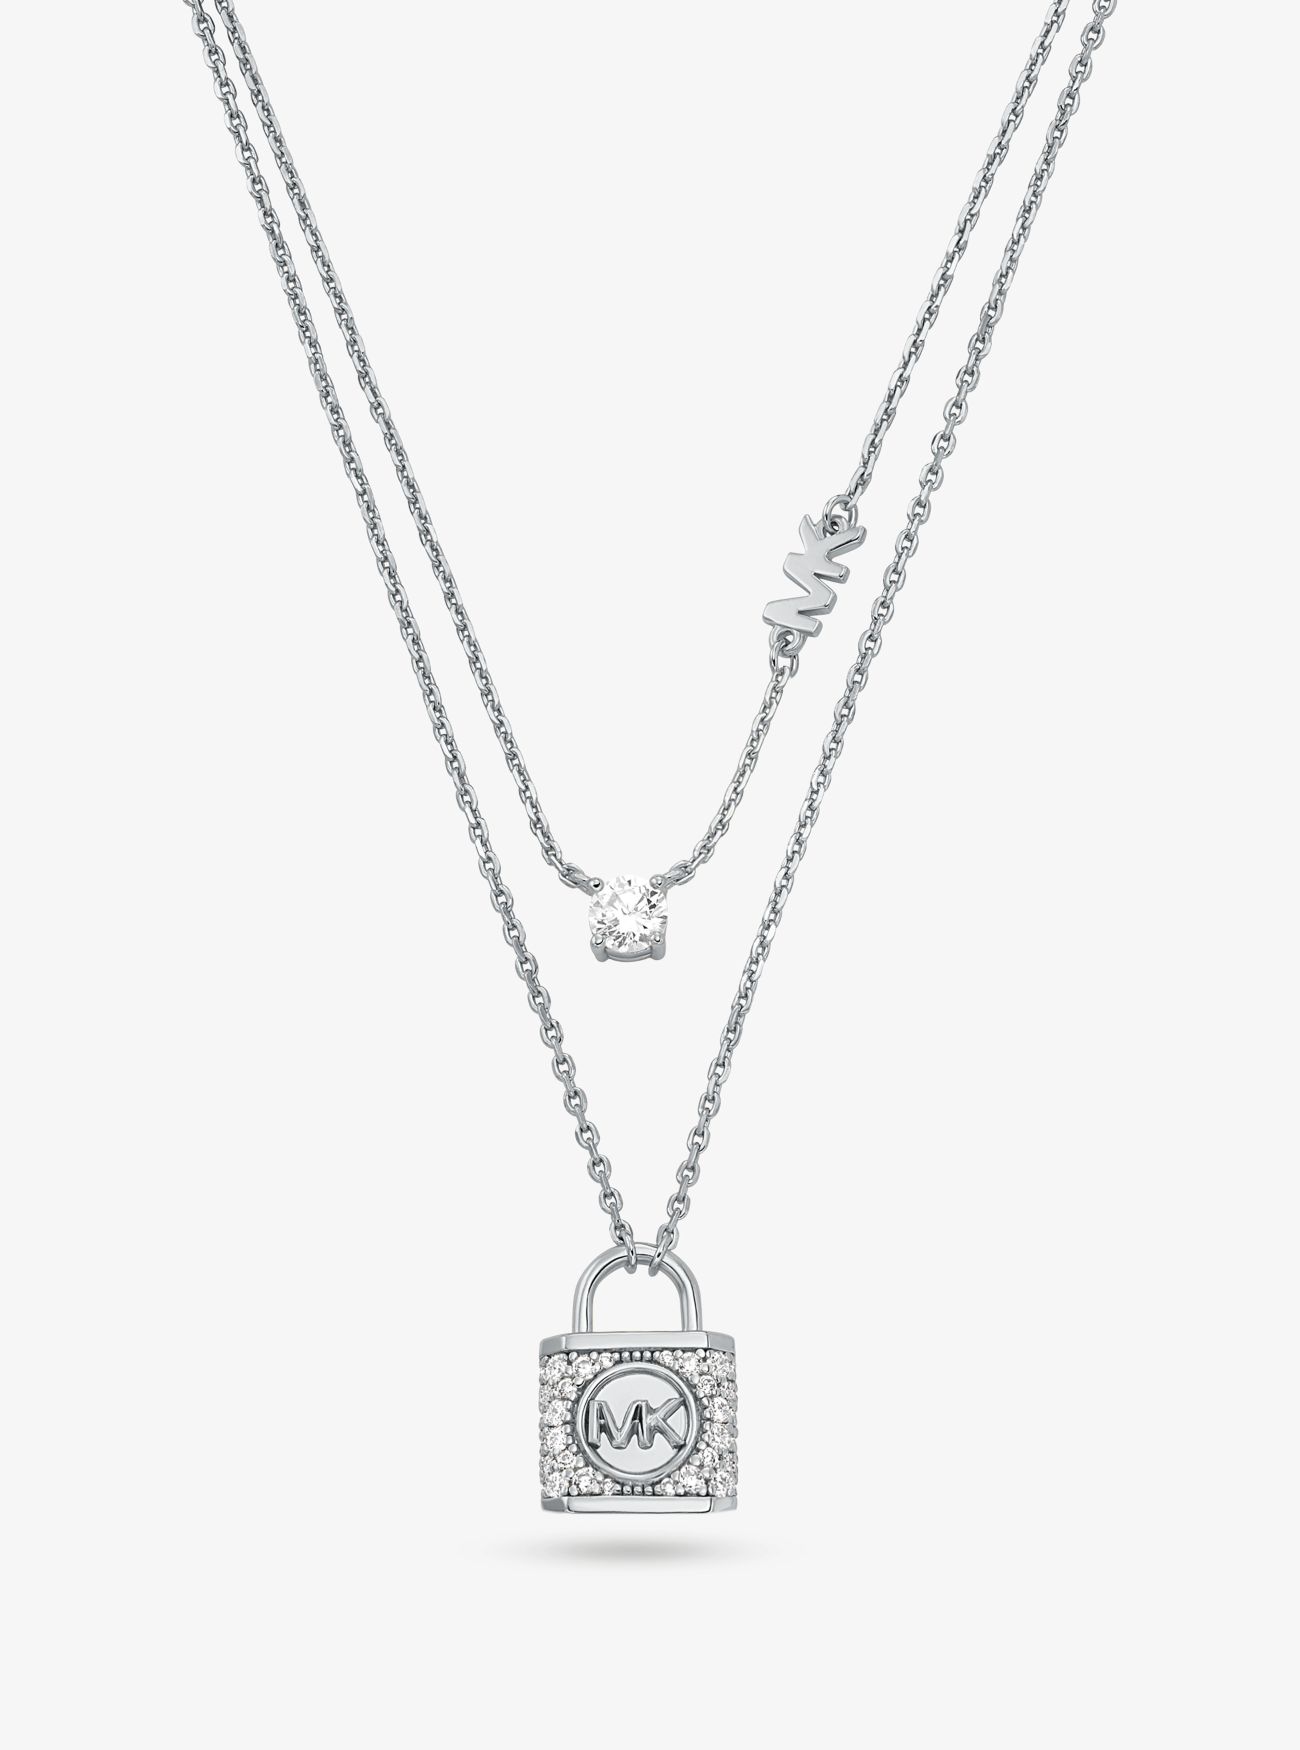 MK Precious Metal-Plated Sterling Silver Pavé Lock Layered Necklace - Grey - Michael Kors